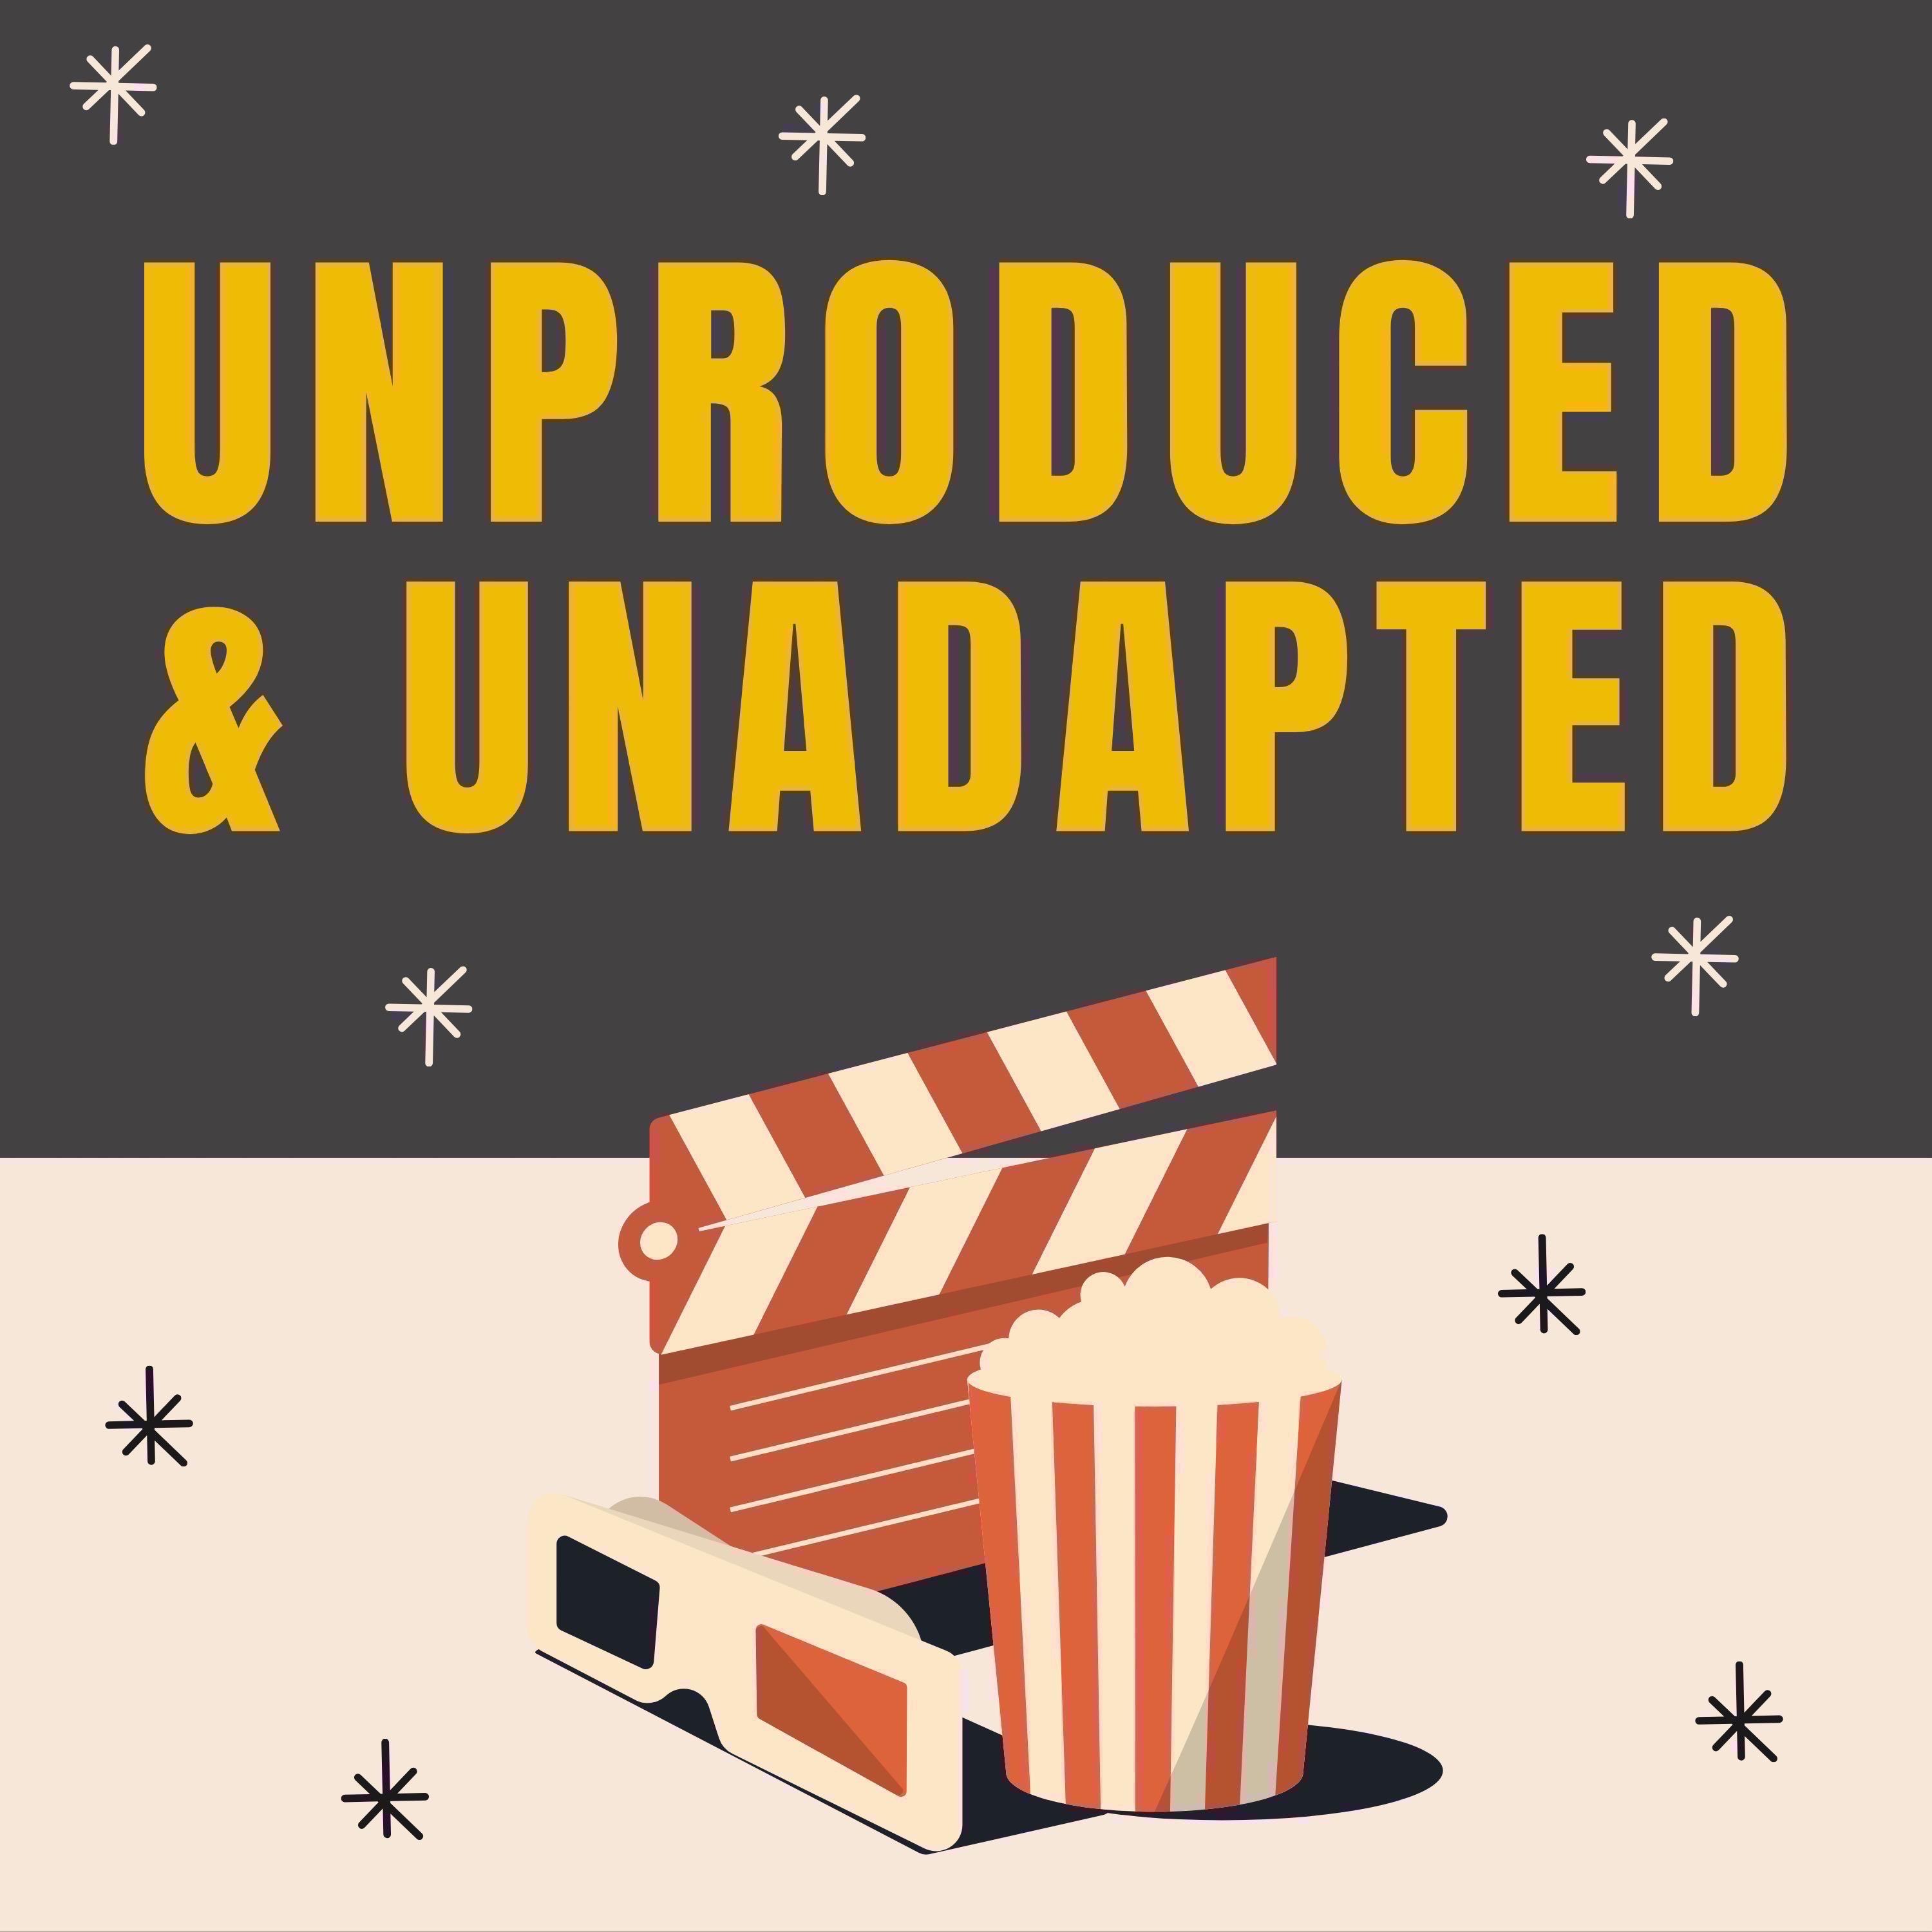 Unproduced and Unadapted